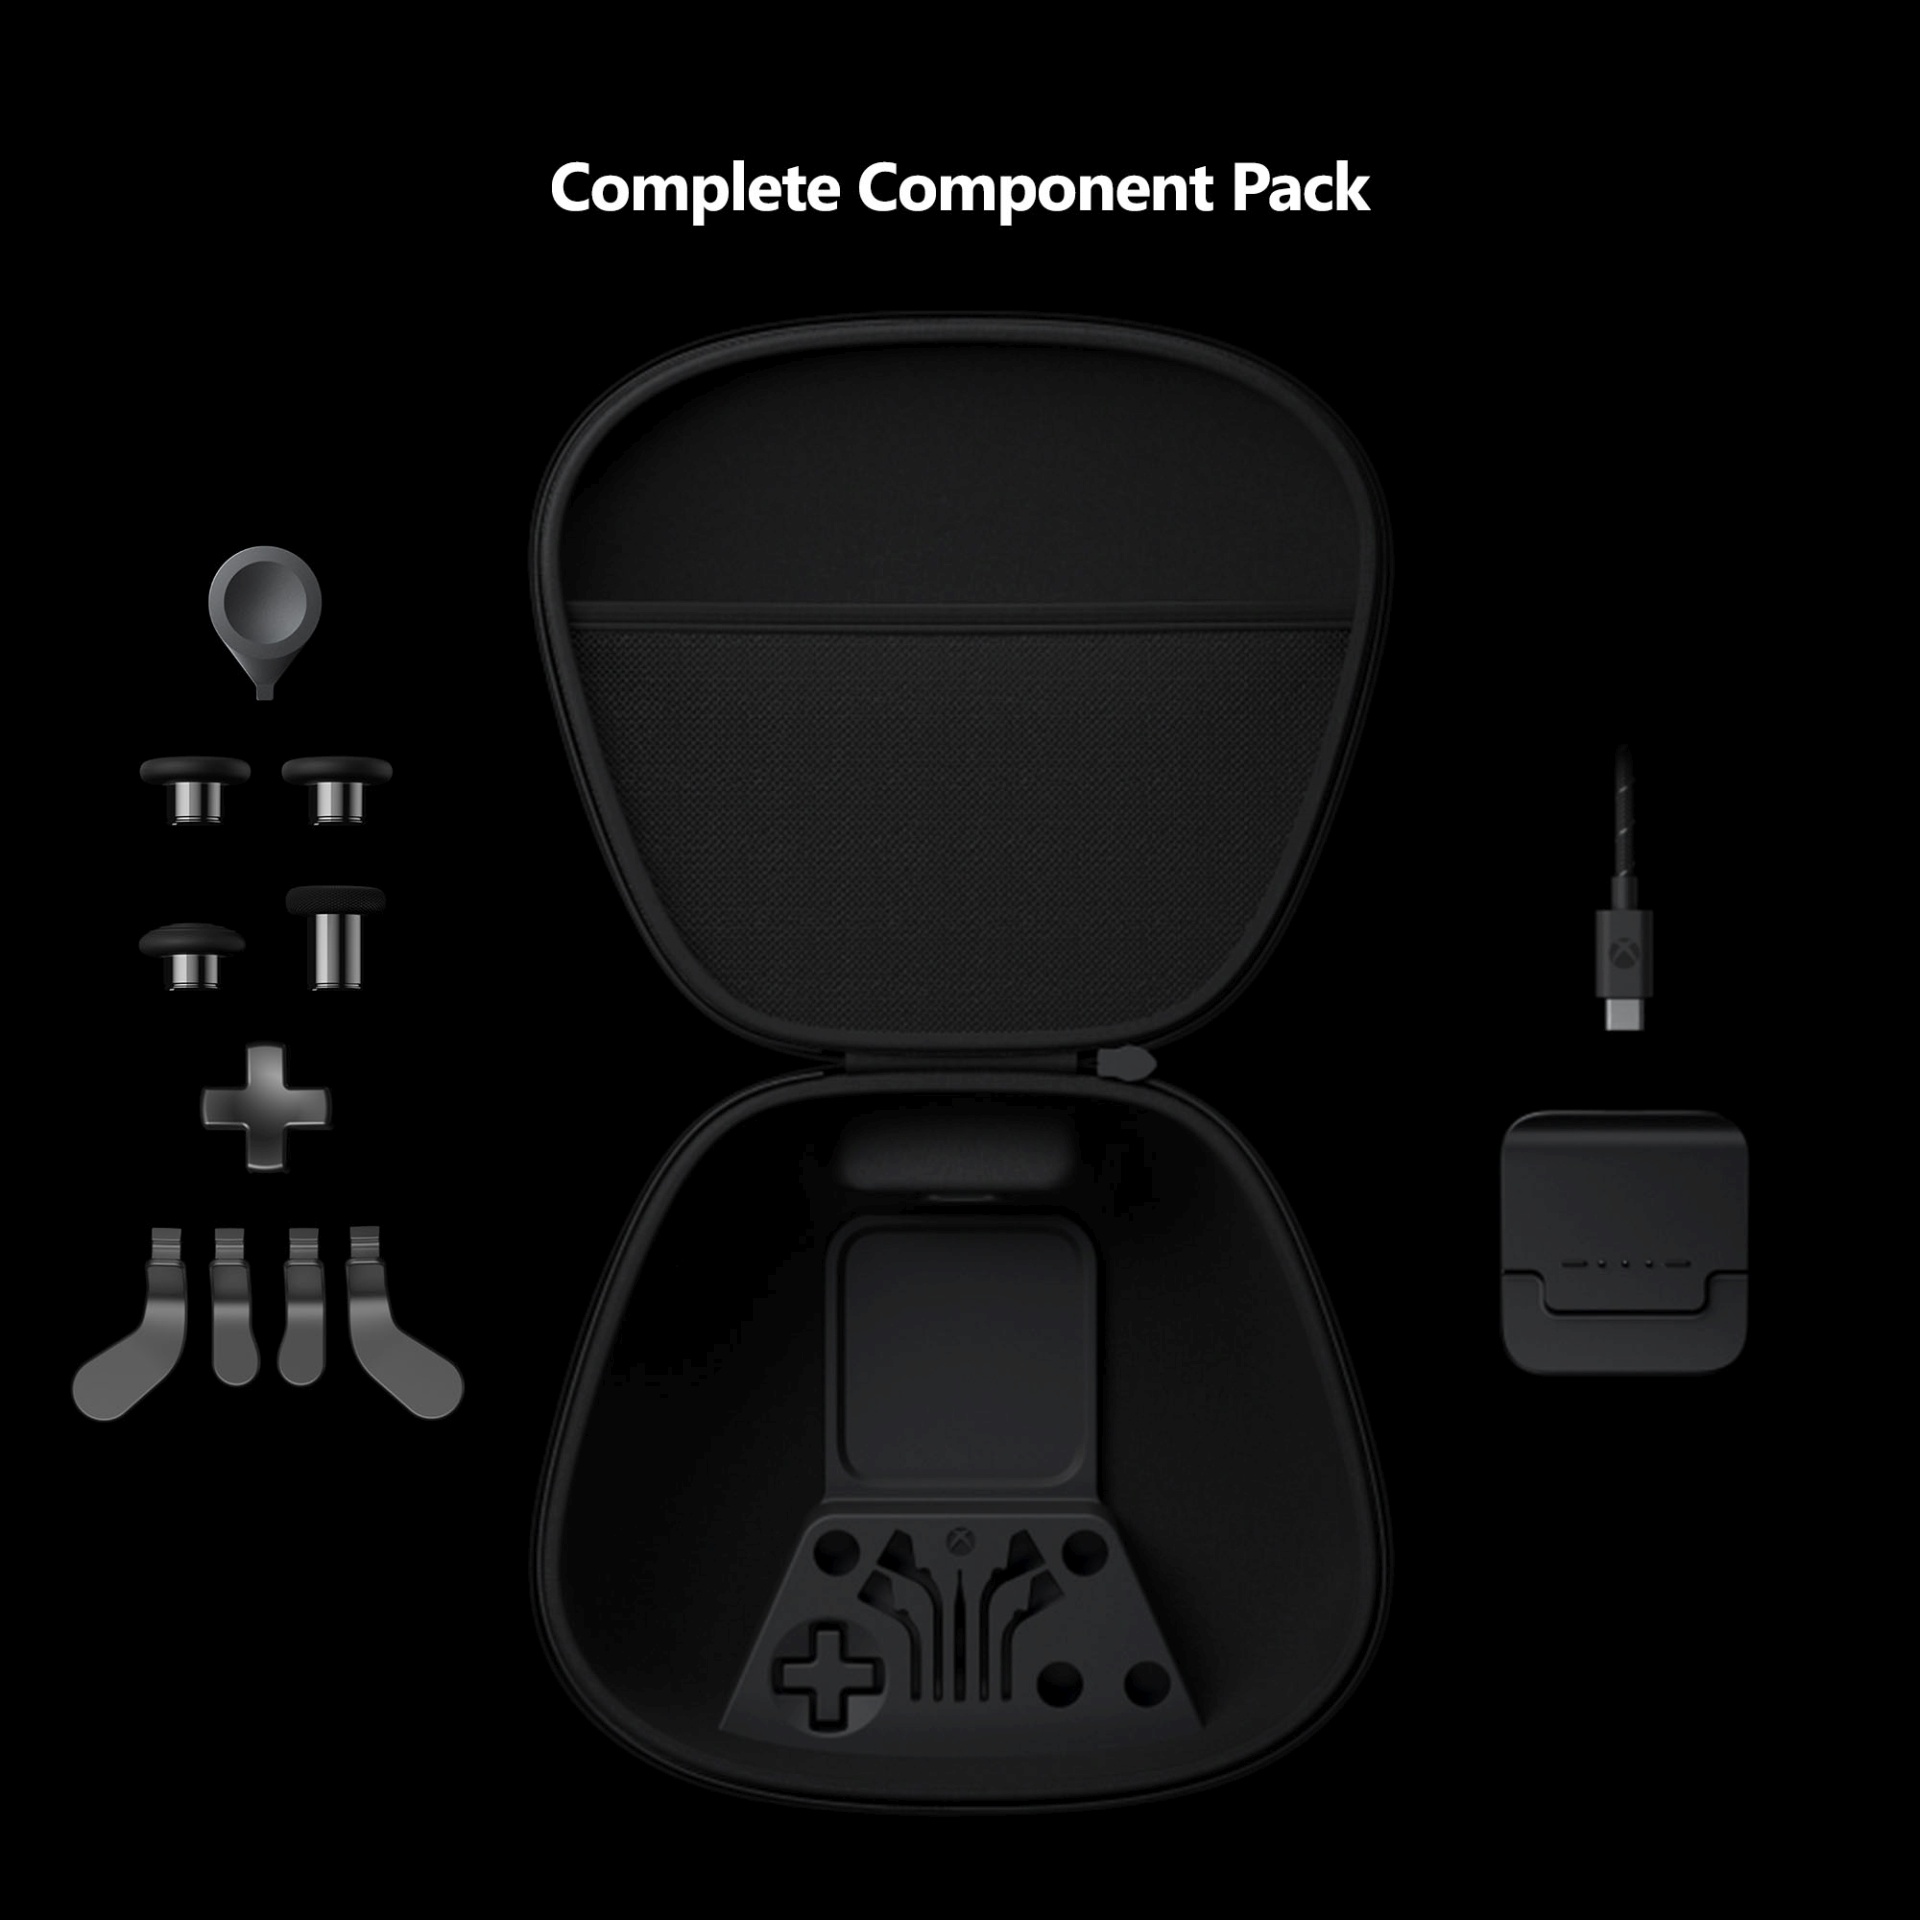 Complete Component Pack Image